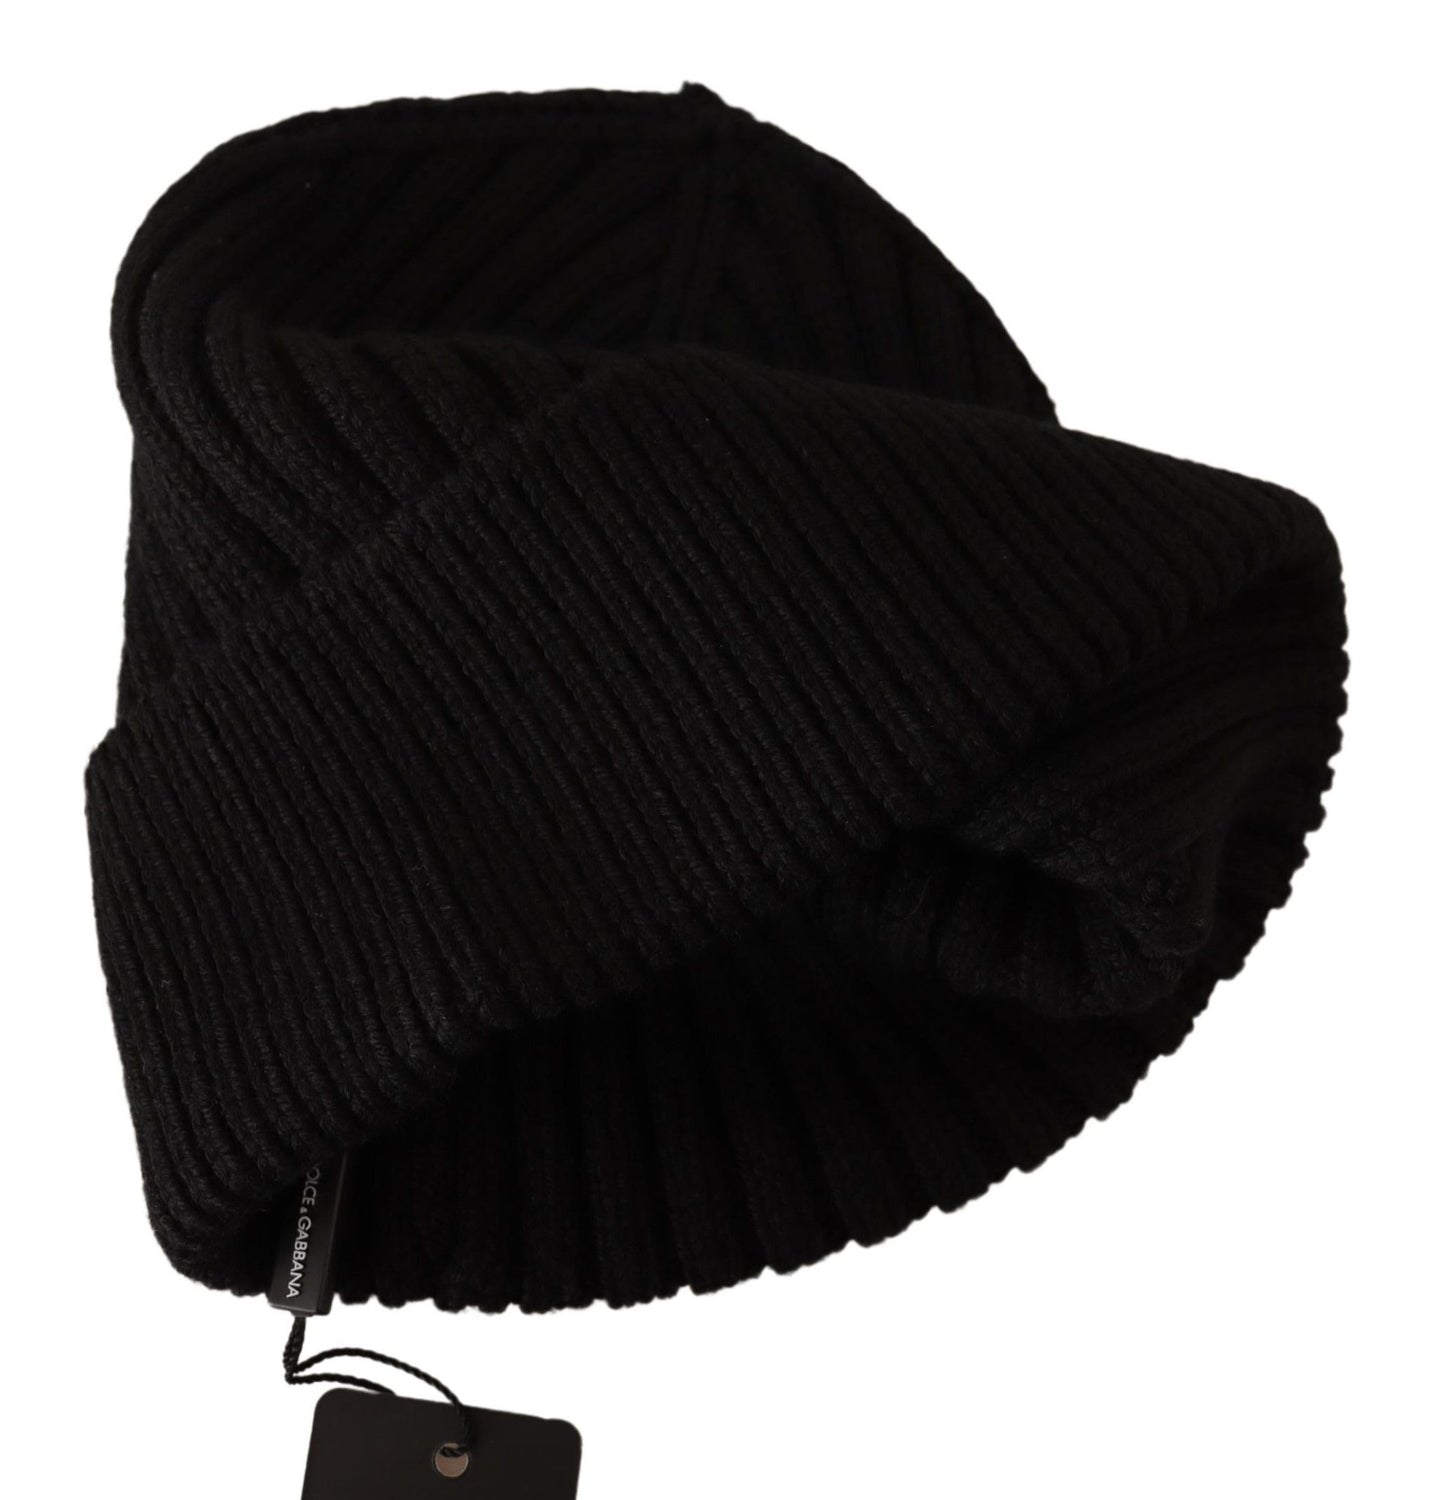 Elegant Cable Knit Wool Beanie with Fleece Liner